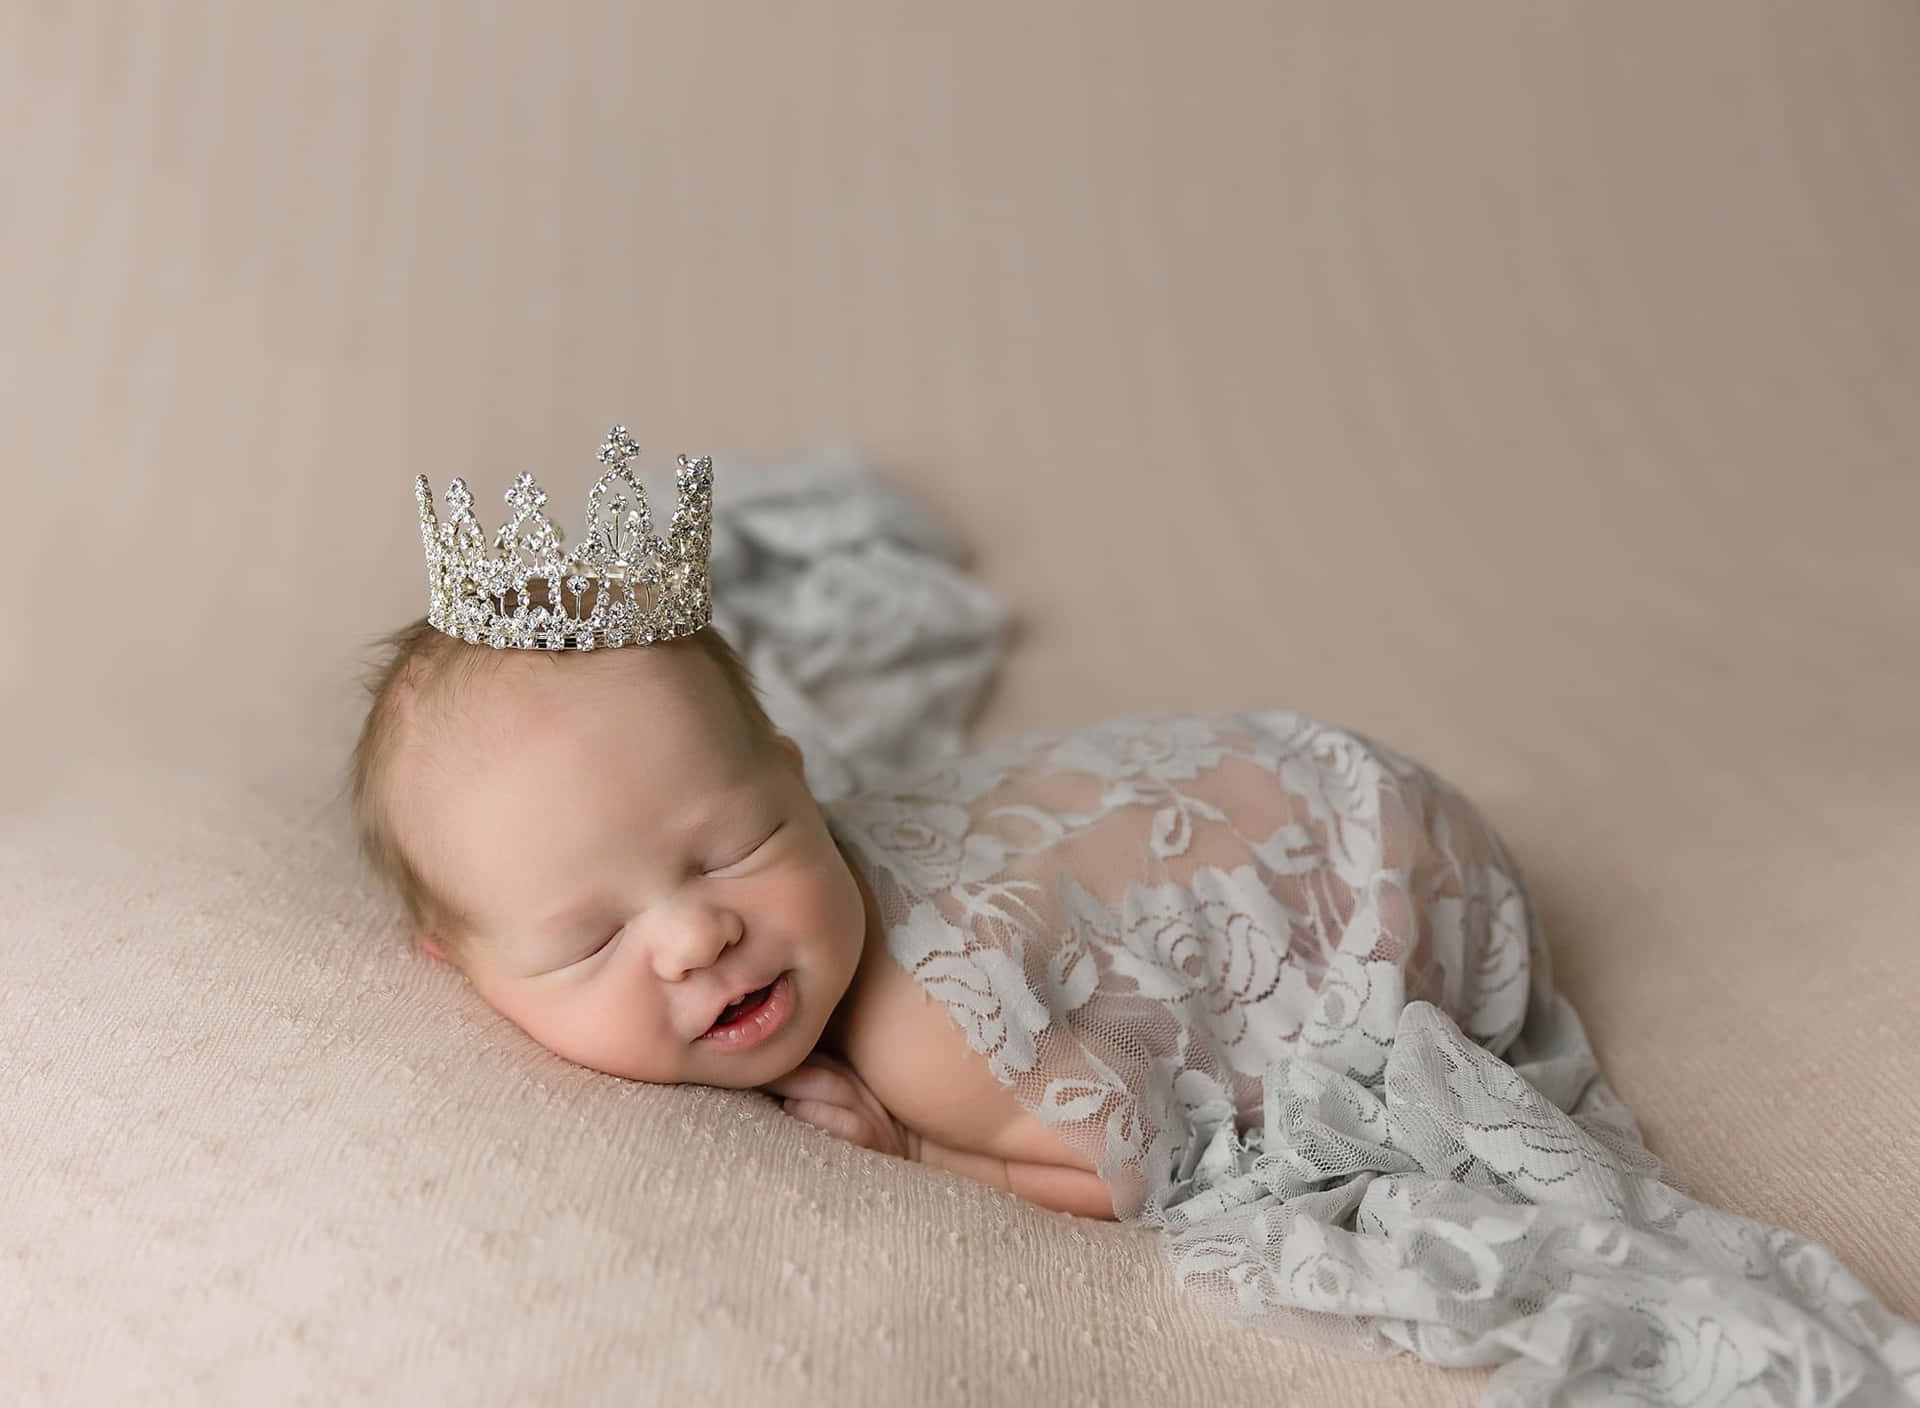 A Baby Girl Wearing A Tiara While Laying On A Blanket Wallpaper